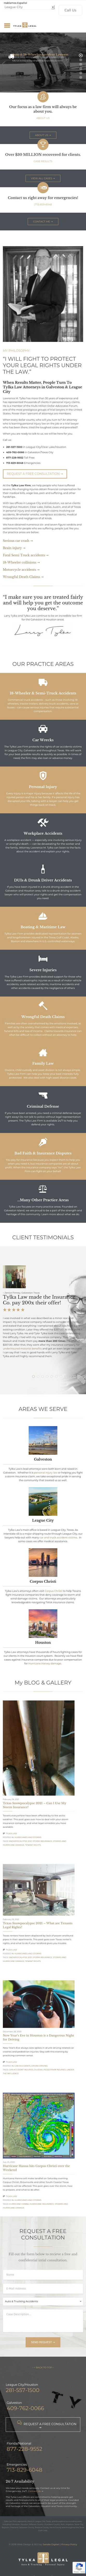 Tylka Law Firm and Mediation Center - Galveston TX Lawyers